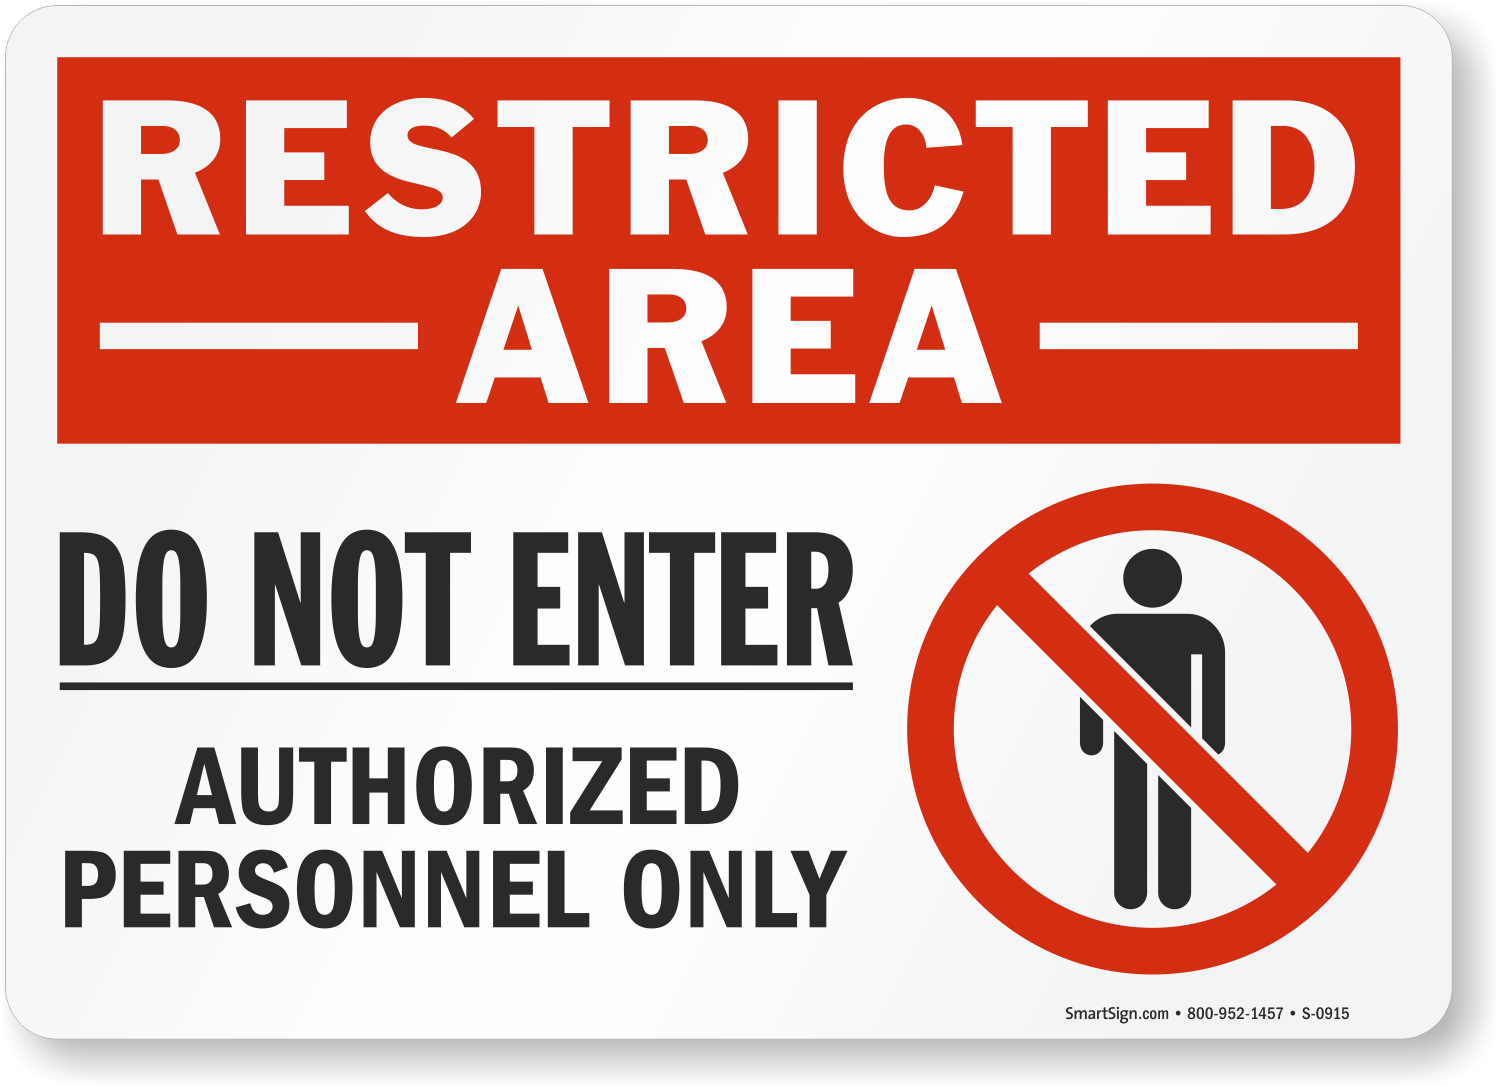 Restricted area sign. Authorized personnel only. Предупреждение restricted. Do not enter authorized personnel only.